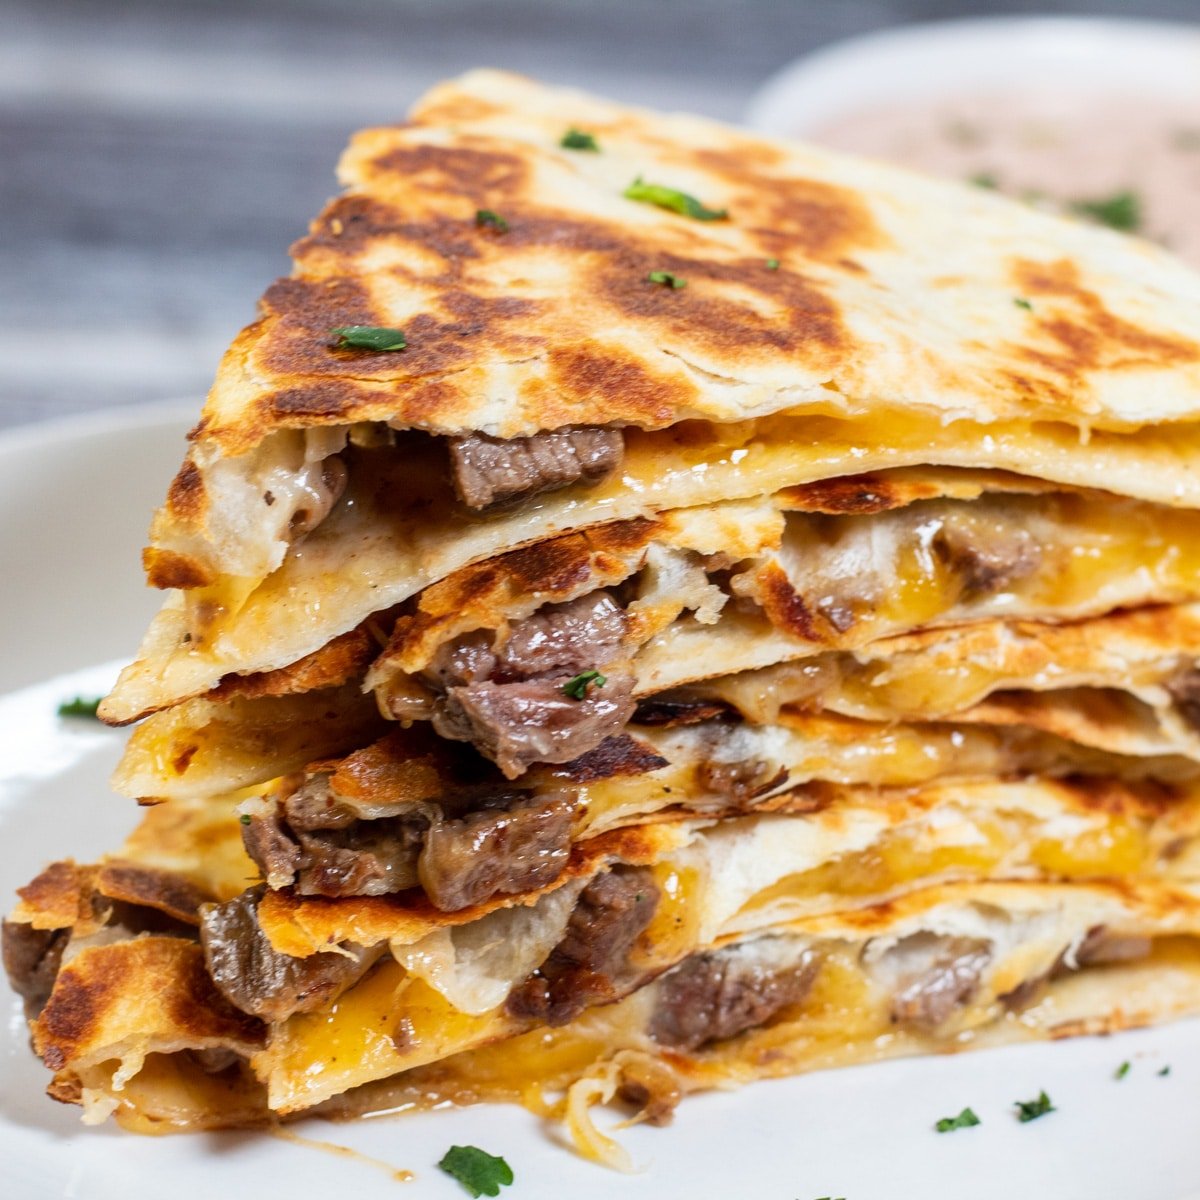 Meaty and cheesy steak quesadillas are always a great dinner option!